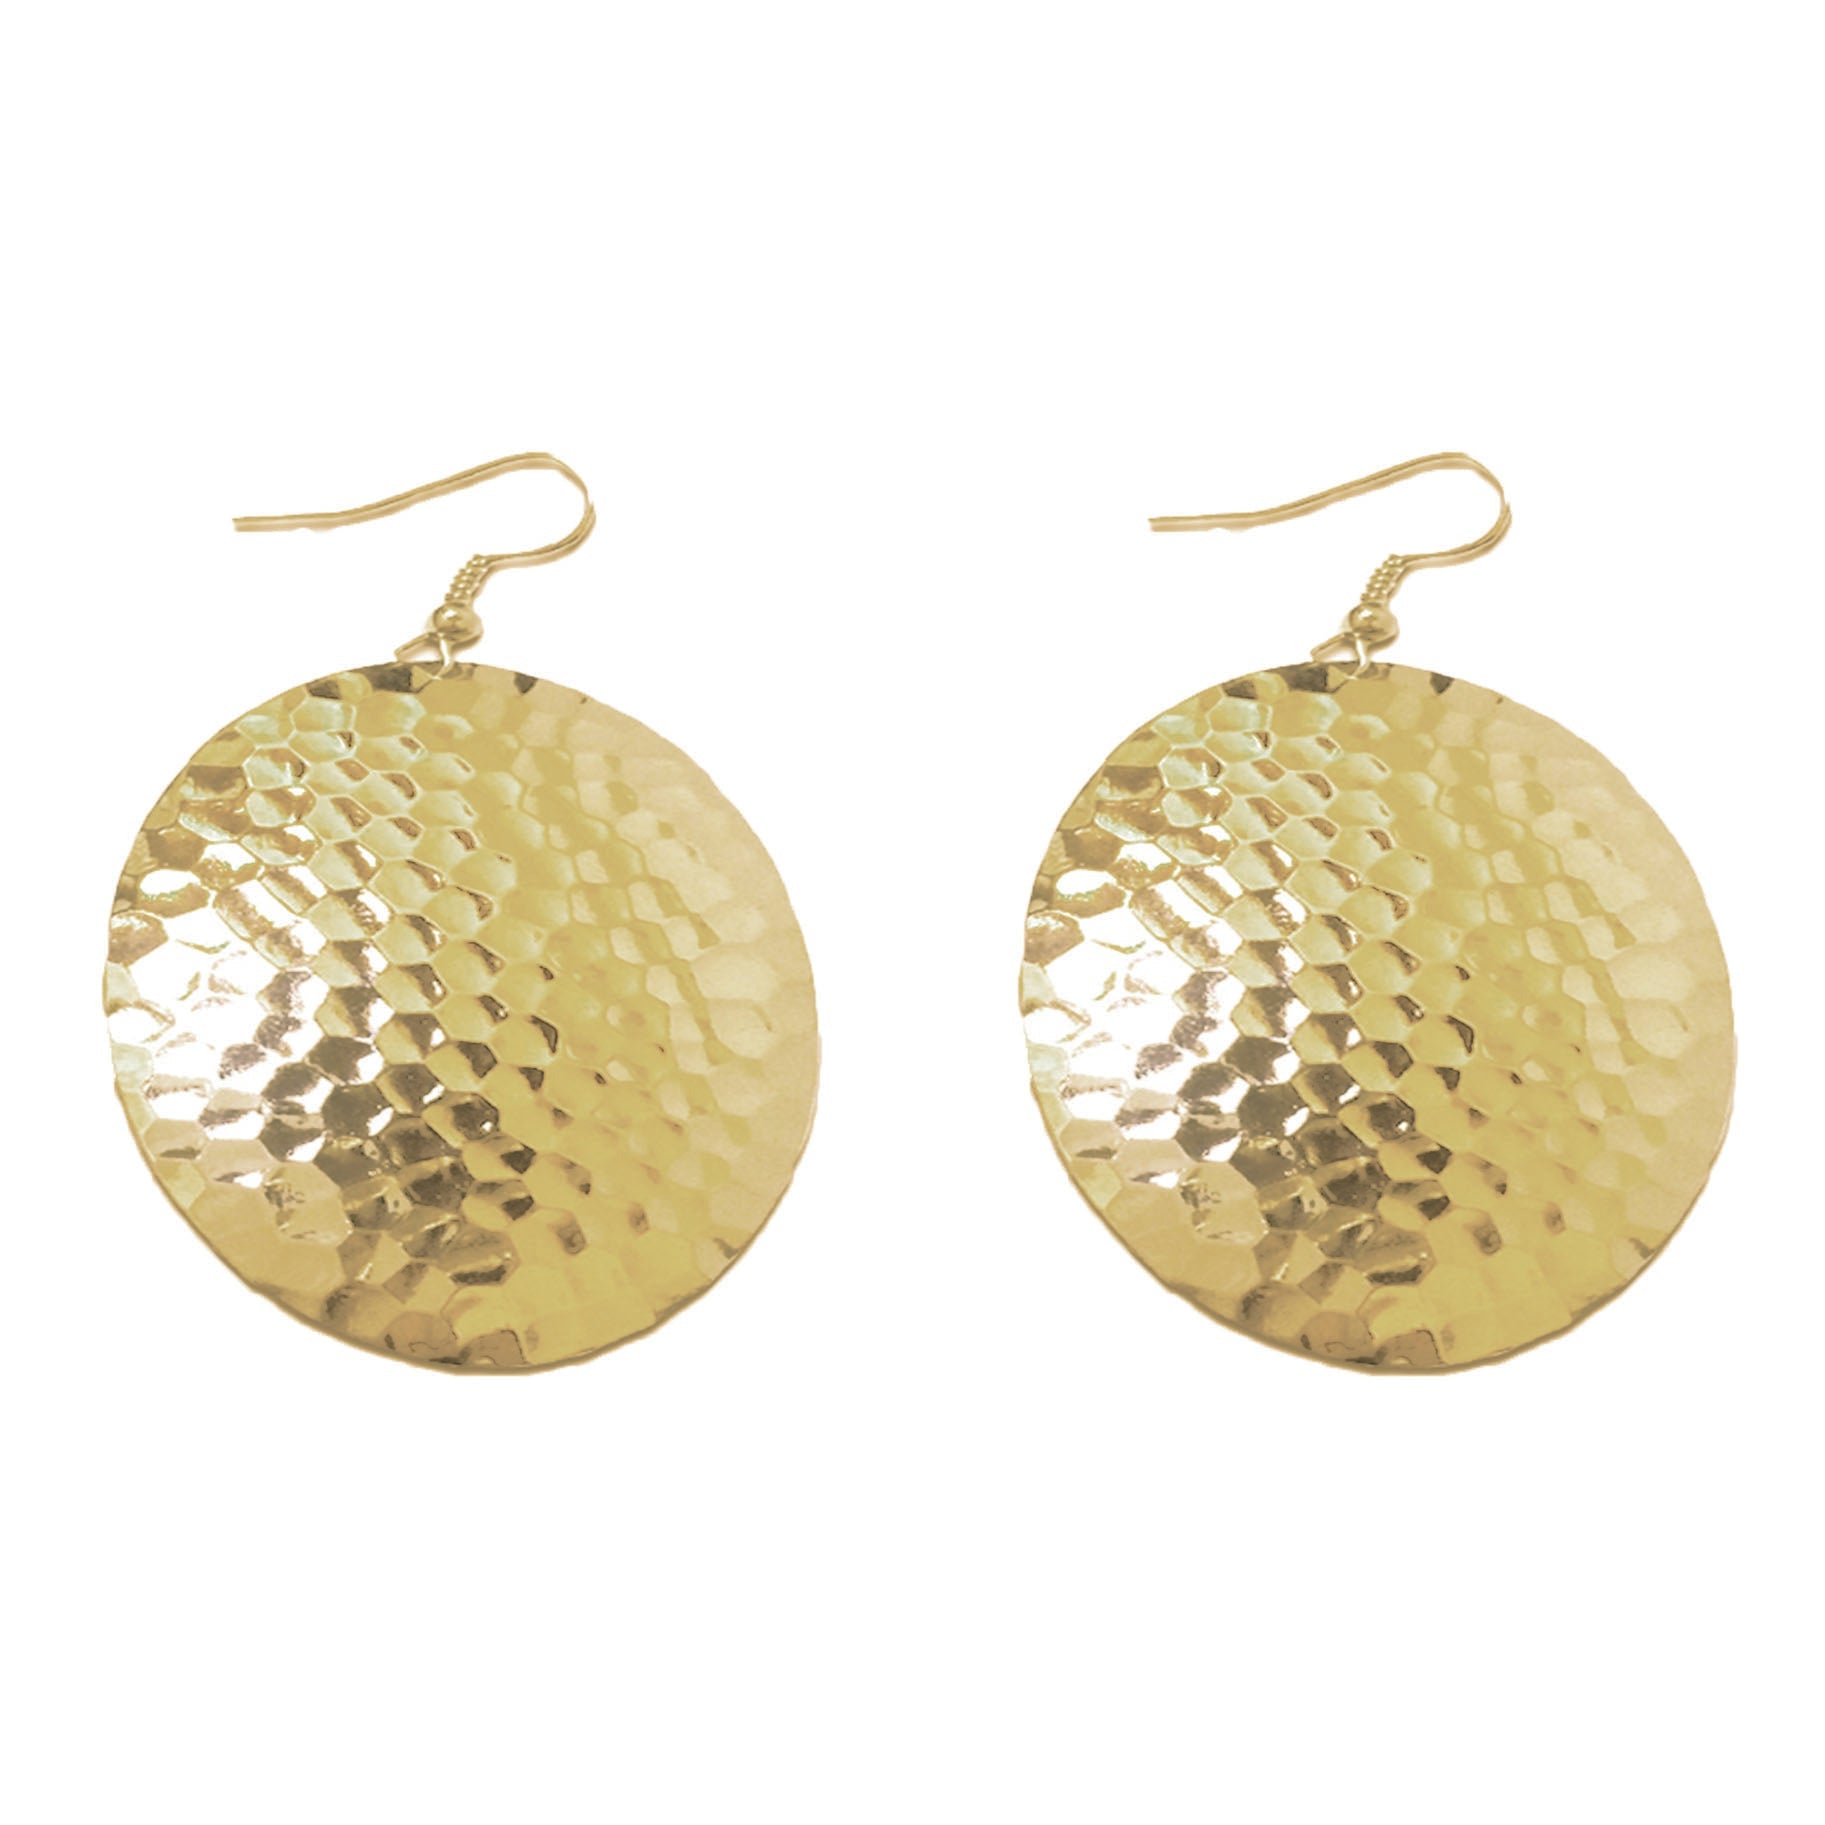 Hammered Circle Earrings | Gold or Silver Dipped